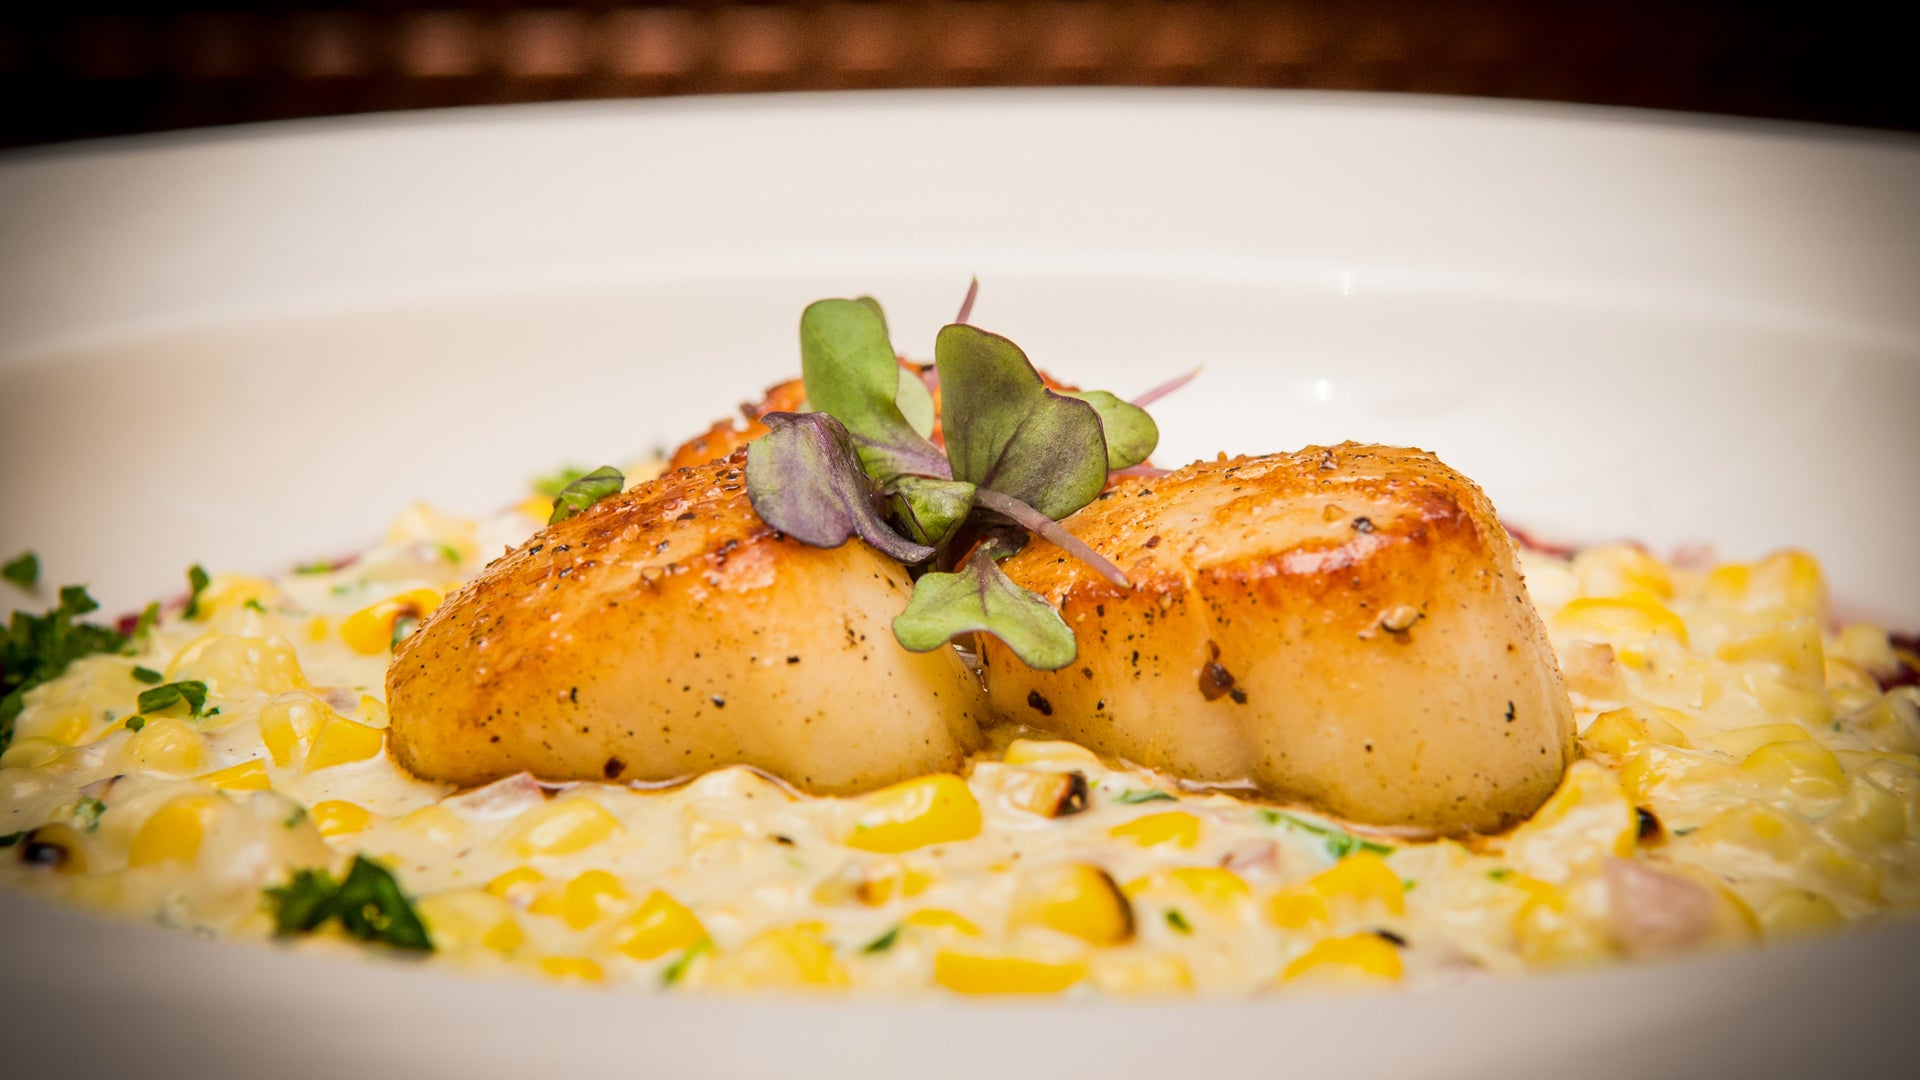 Seared Scallops with Corn Purée